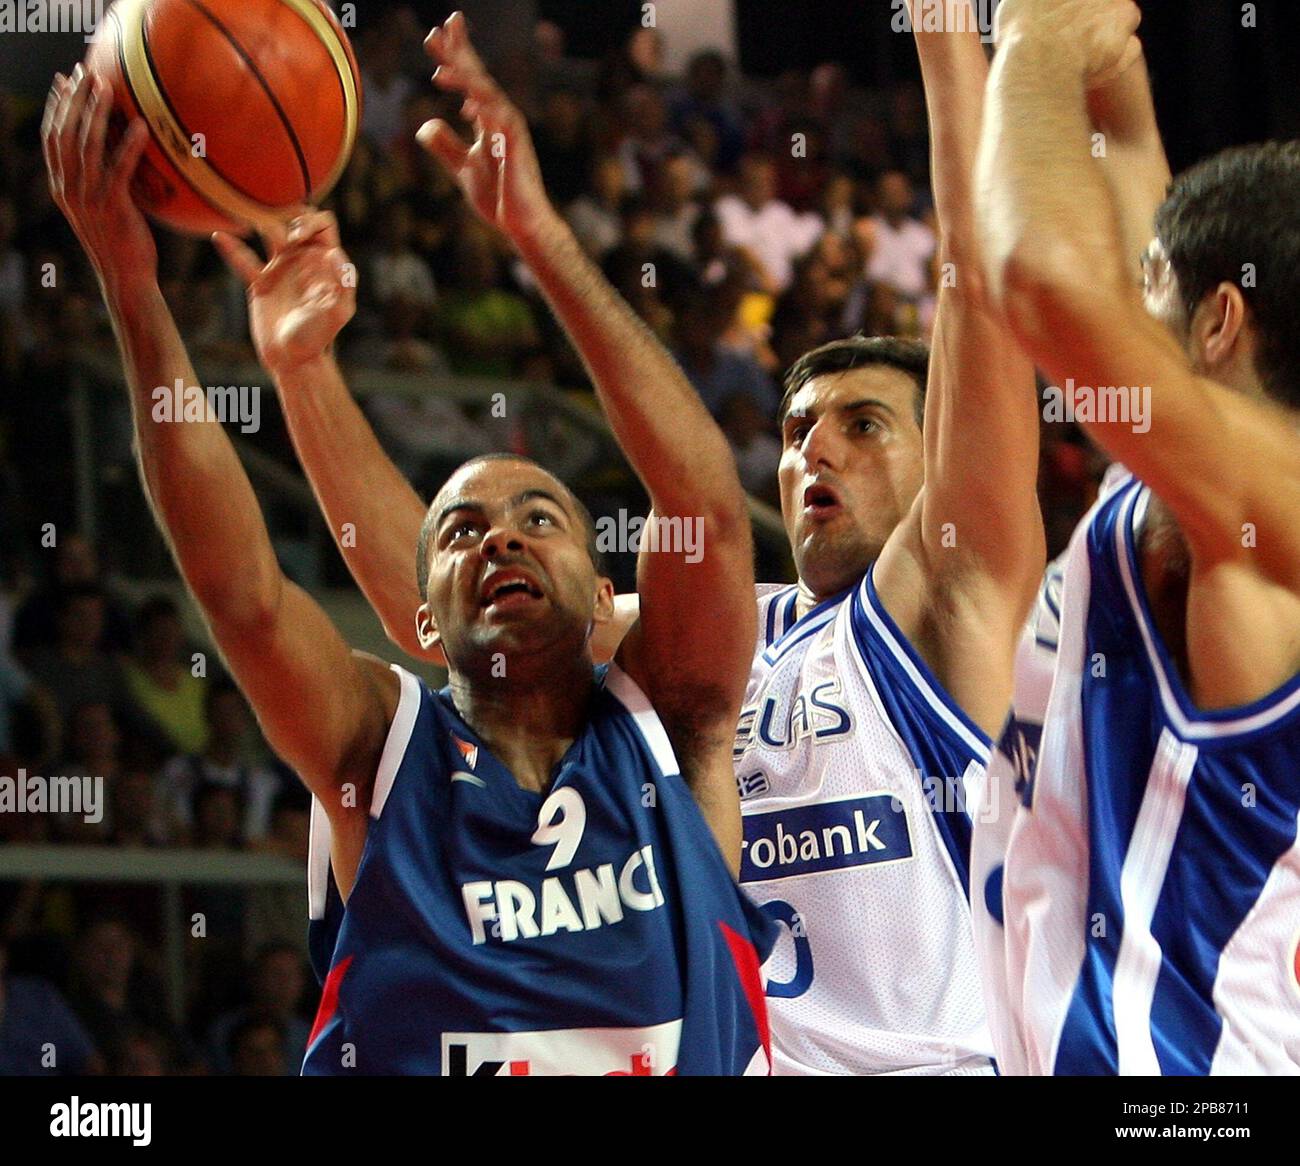 France's Tony Parker, left, tries to shoot as Nikos Hatzivretas, center and  Panagiotis Vasilopoulos defend for Greece during their basketball  Eurotournament match Saturday Aug. 11, 2007 in Strasbourg eastern France.  (AP Photo/Christian